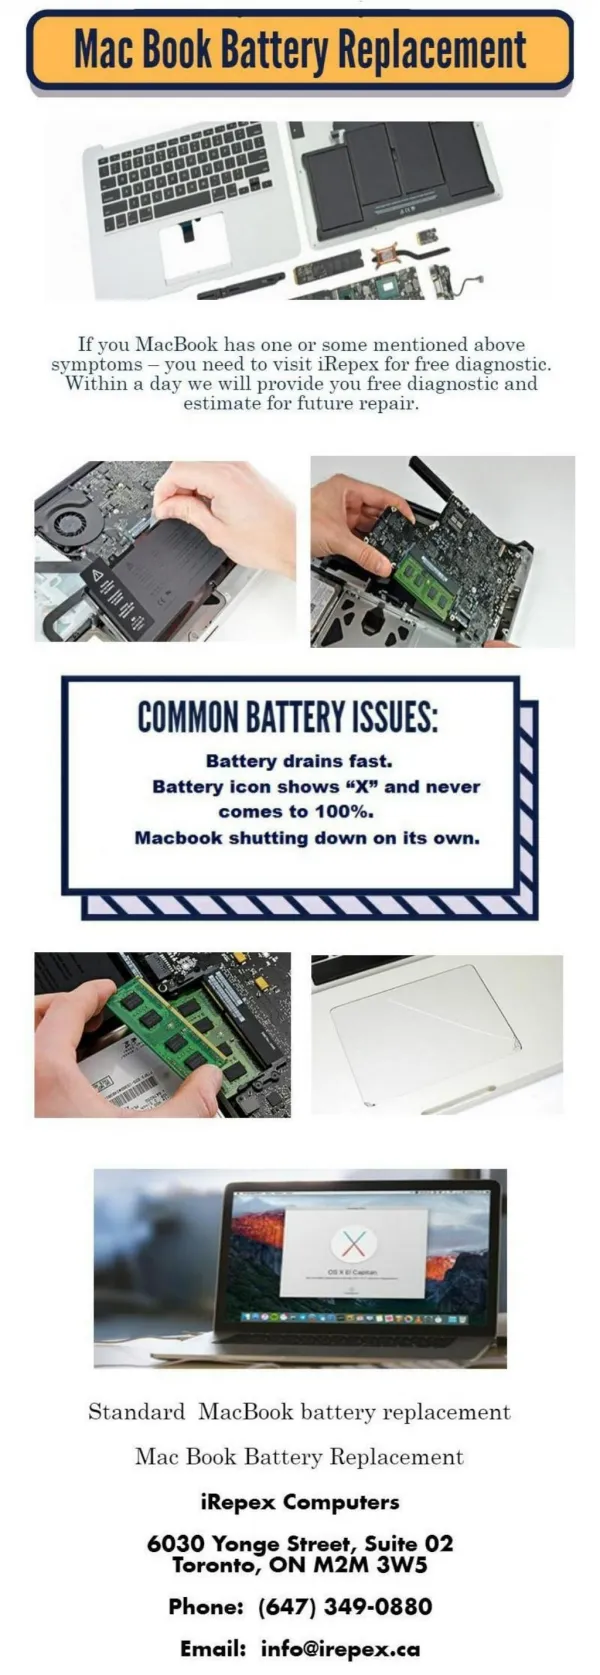 Mac Book Battery Replacement